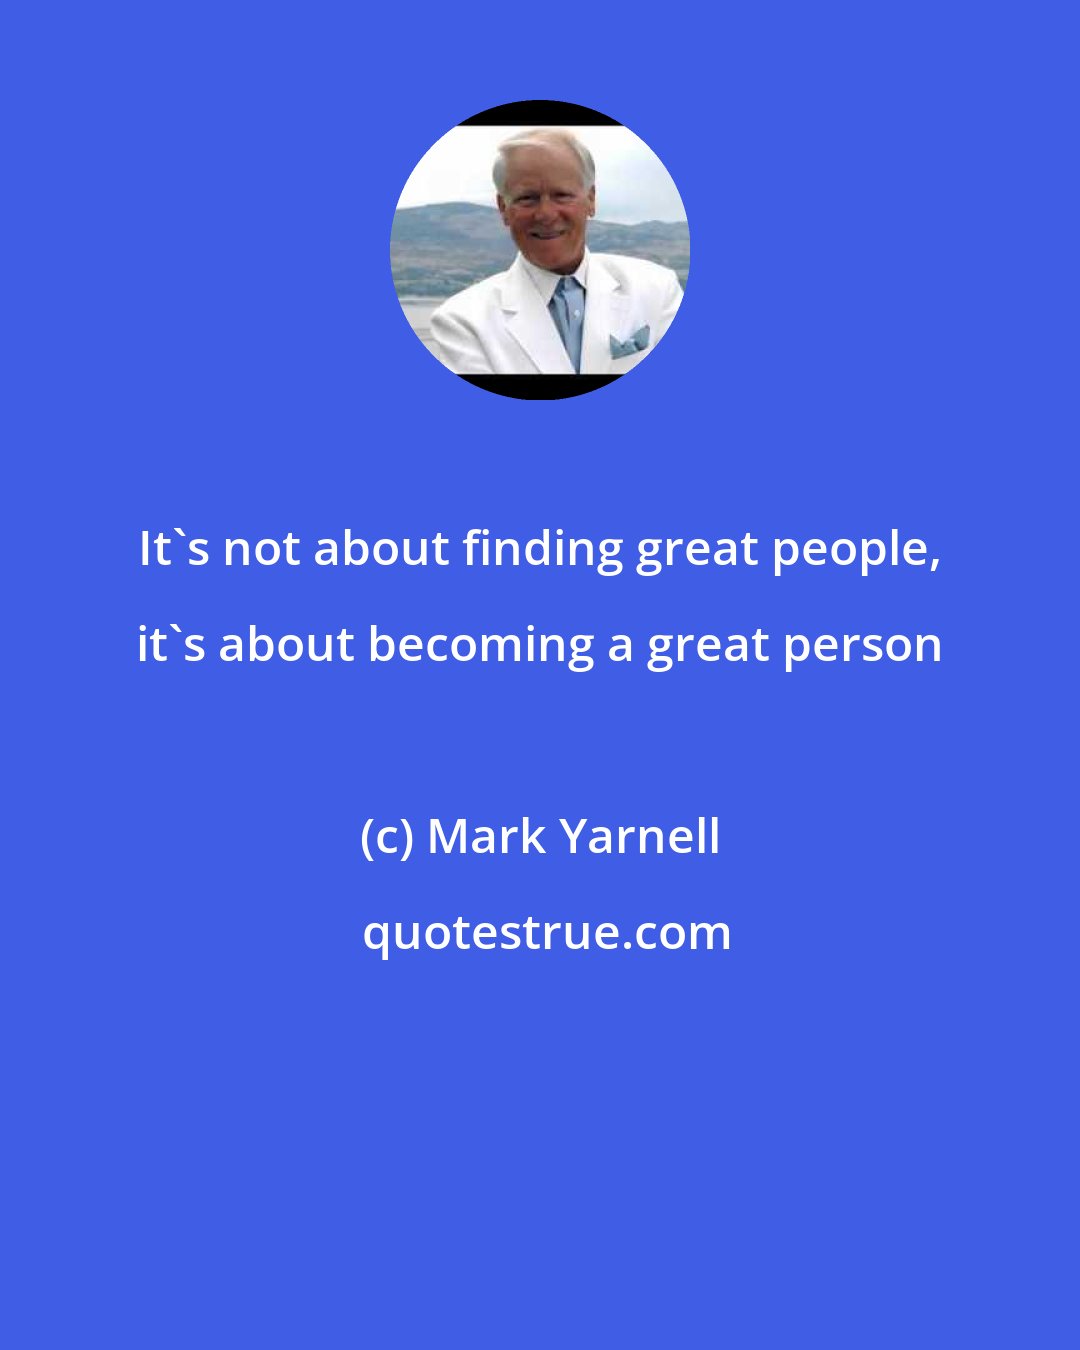 Mark Yarnell: It's not about finding great people, it's about becoming a great person